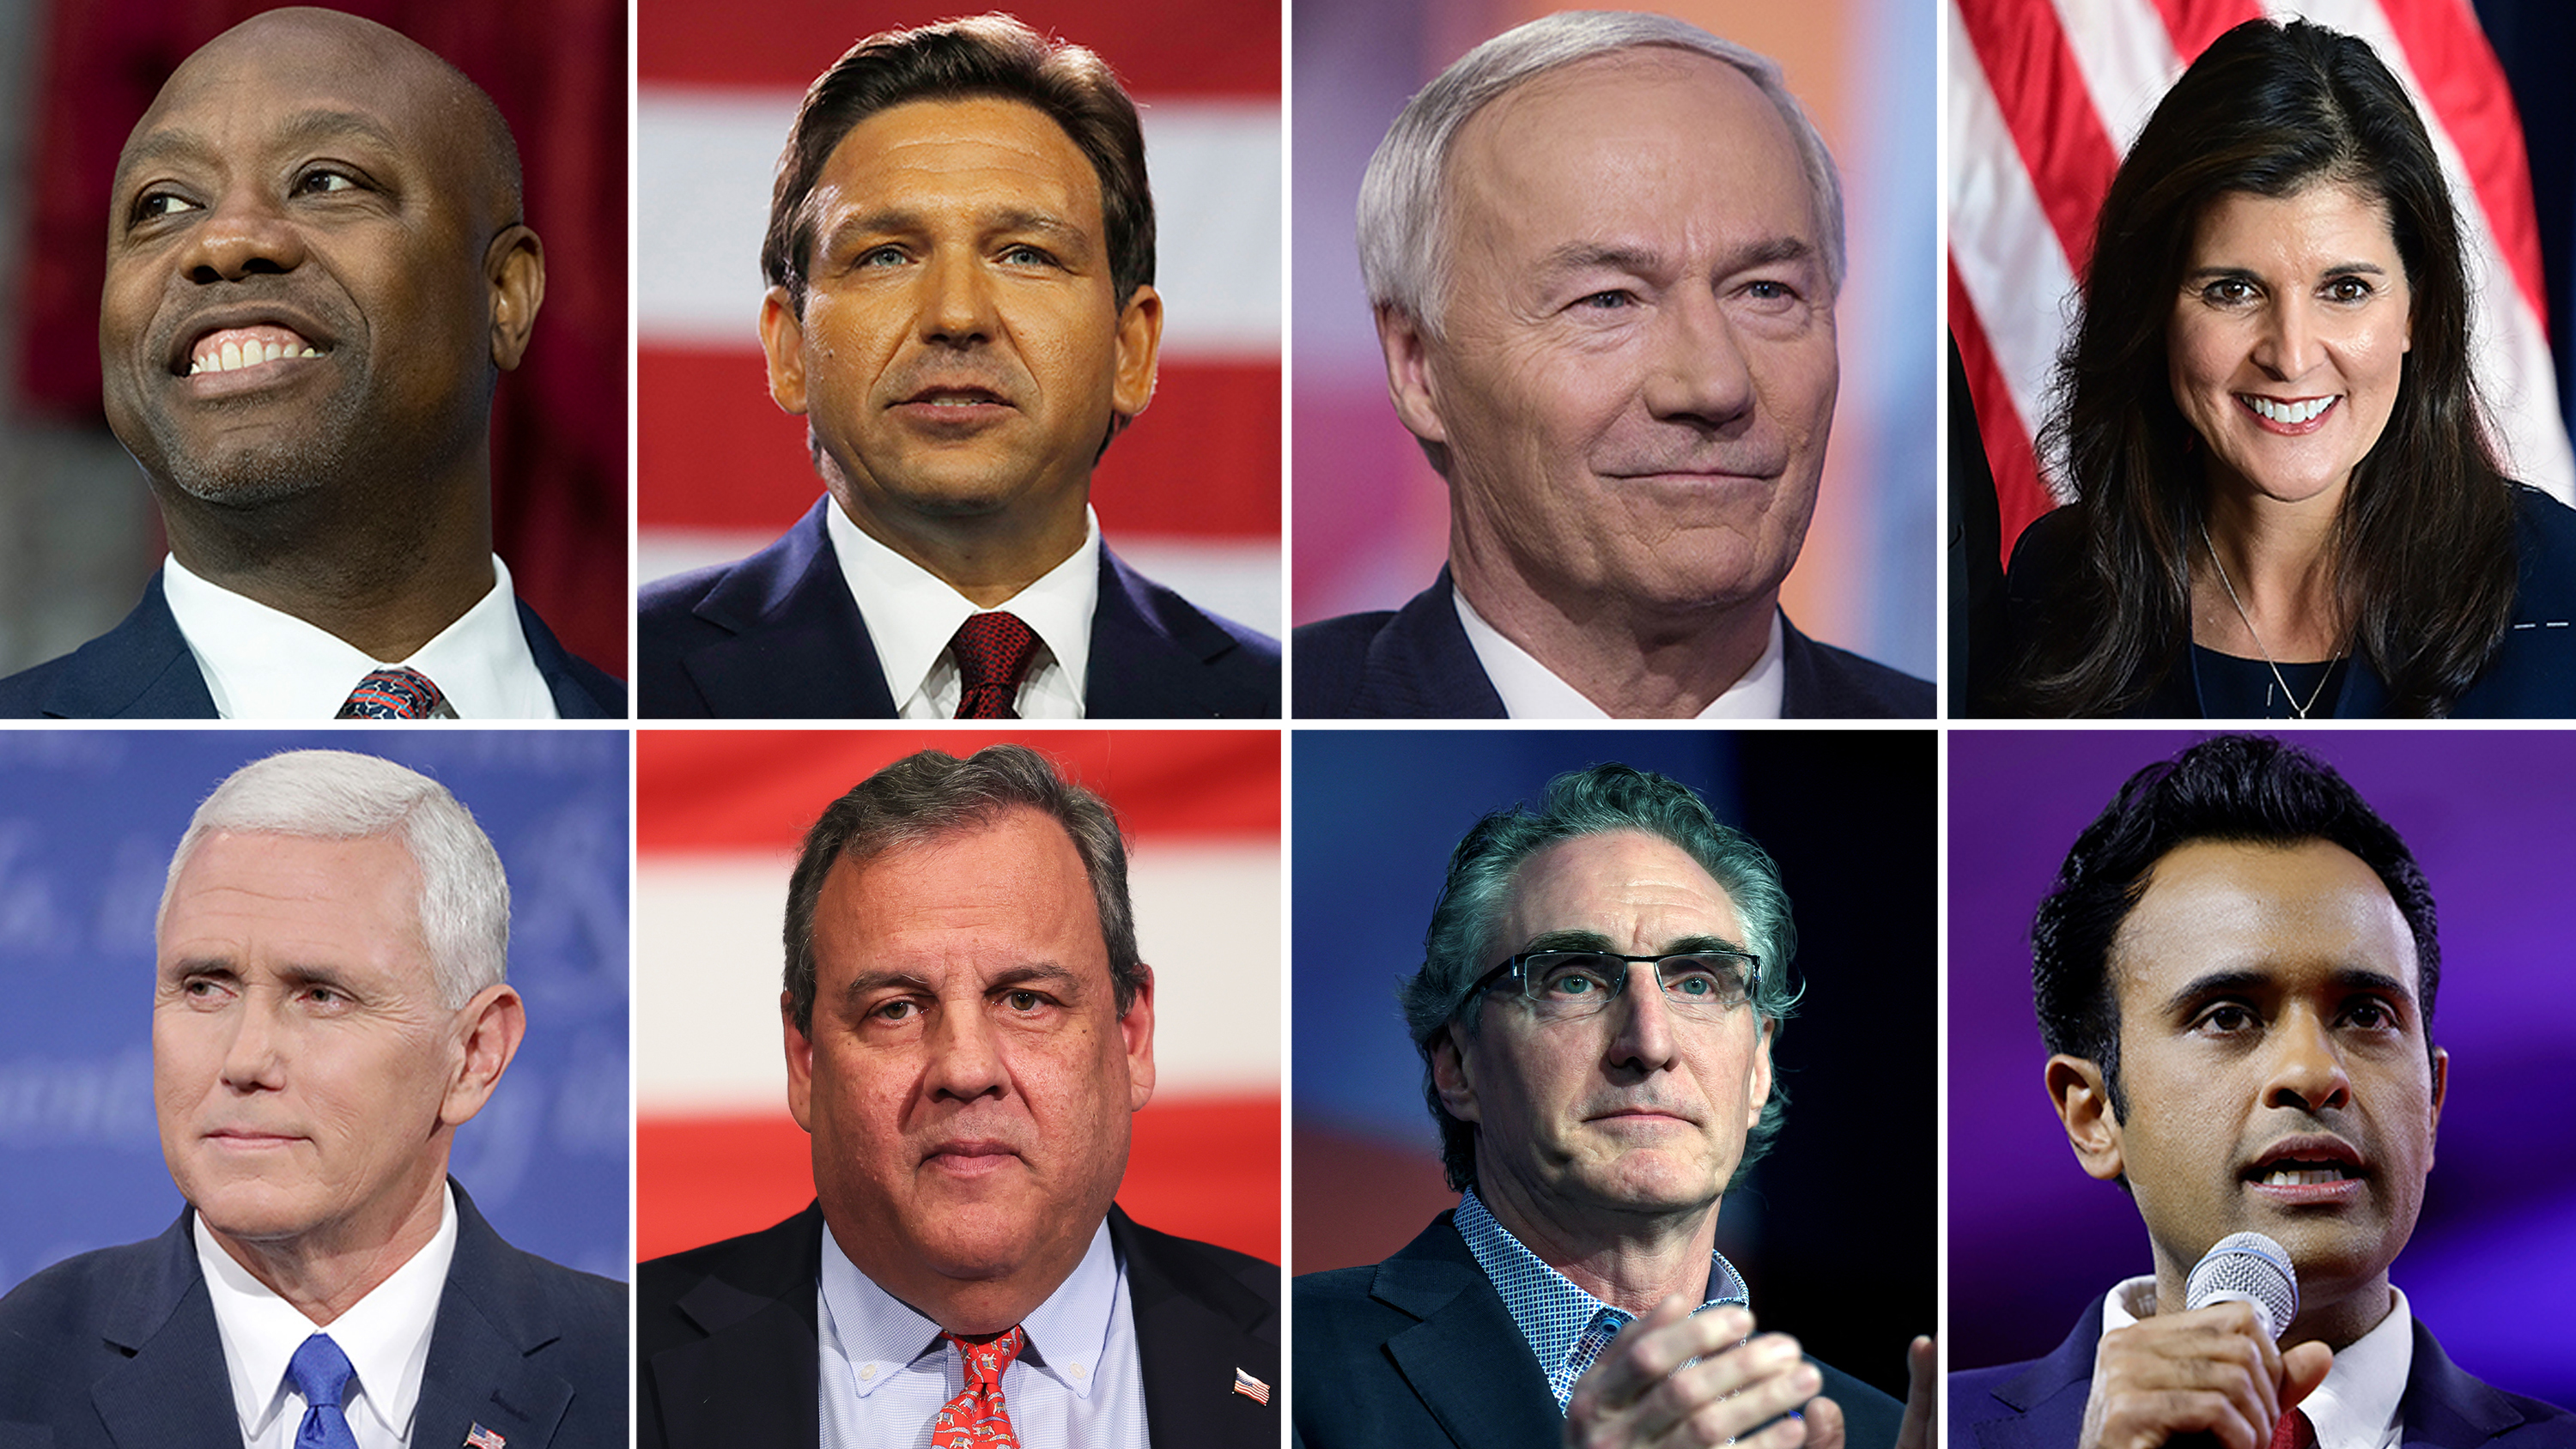 Fifteen Additional Republican Candidates